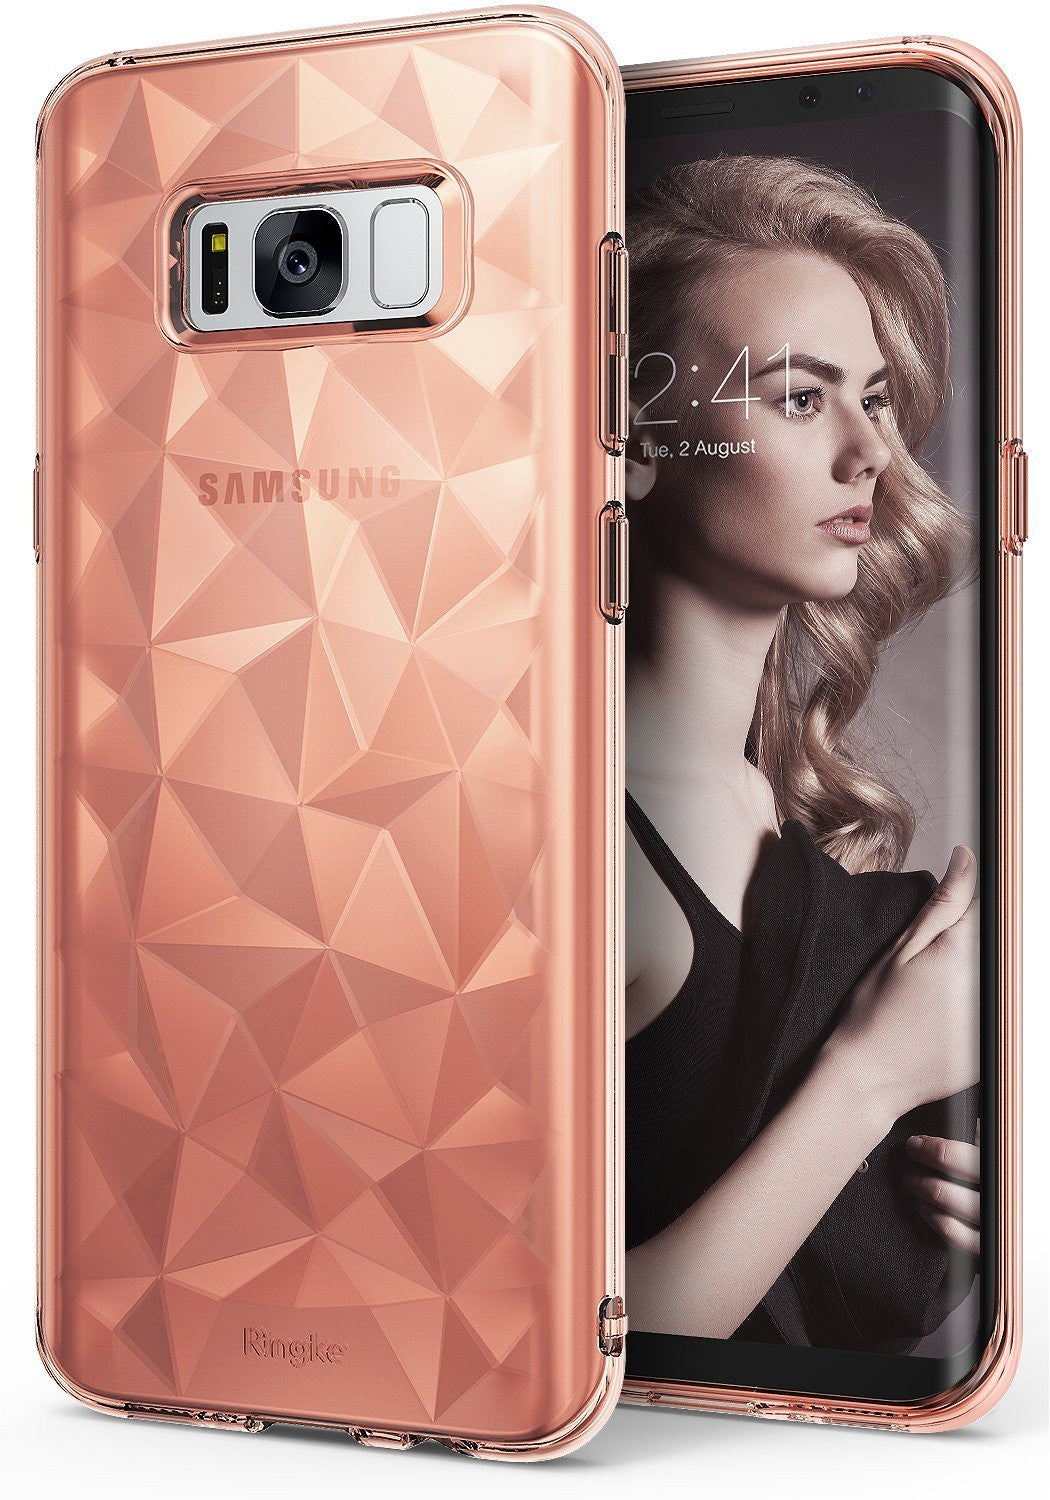 ringke air prism design back 3d flexible cover case for galaxy s8 rose gold